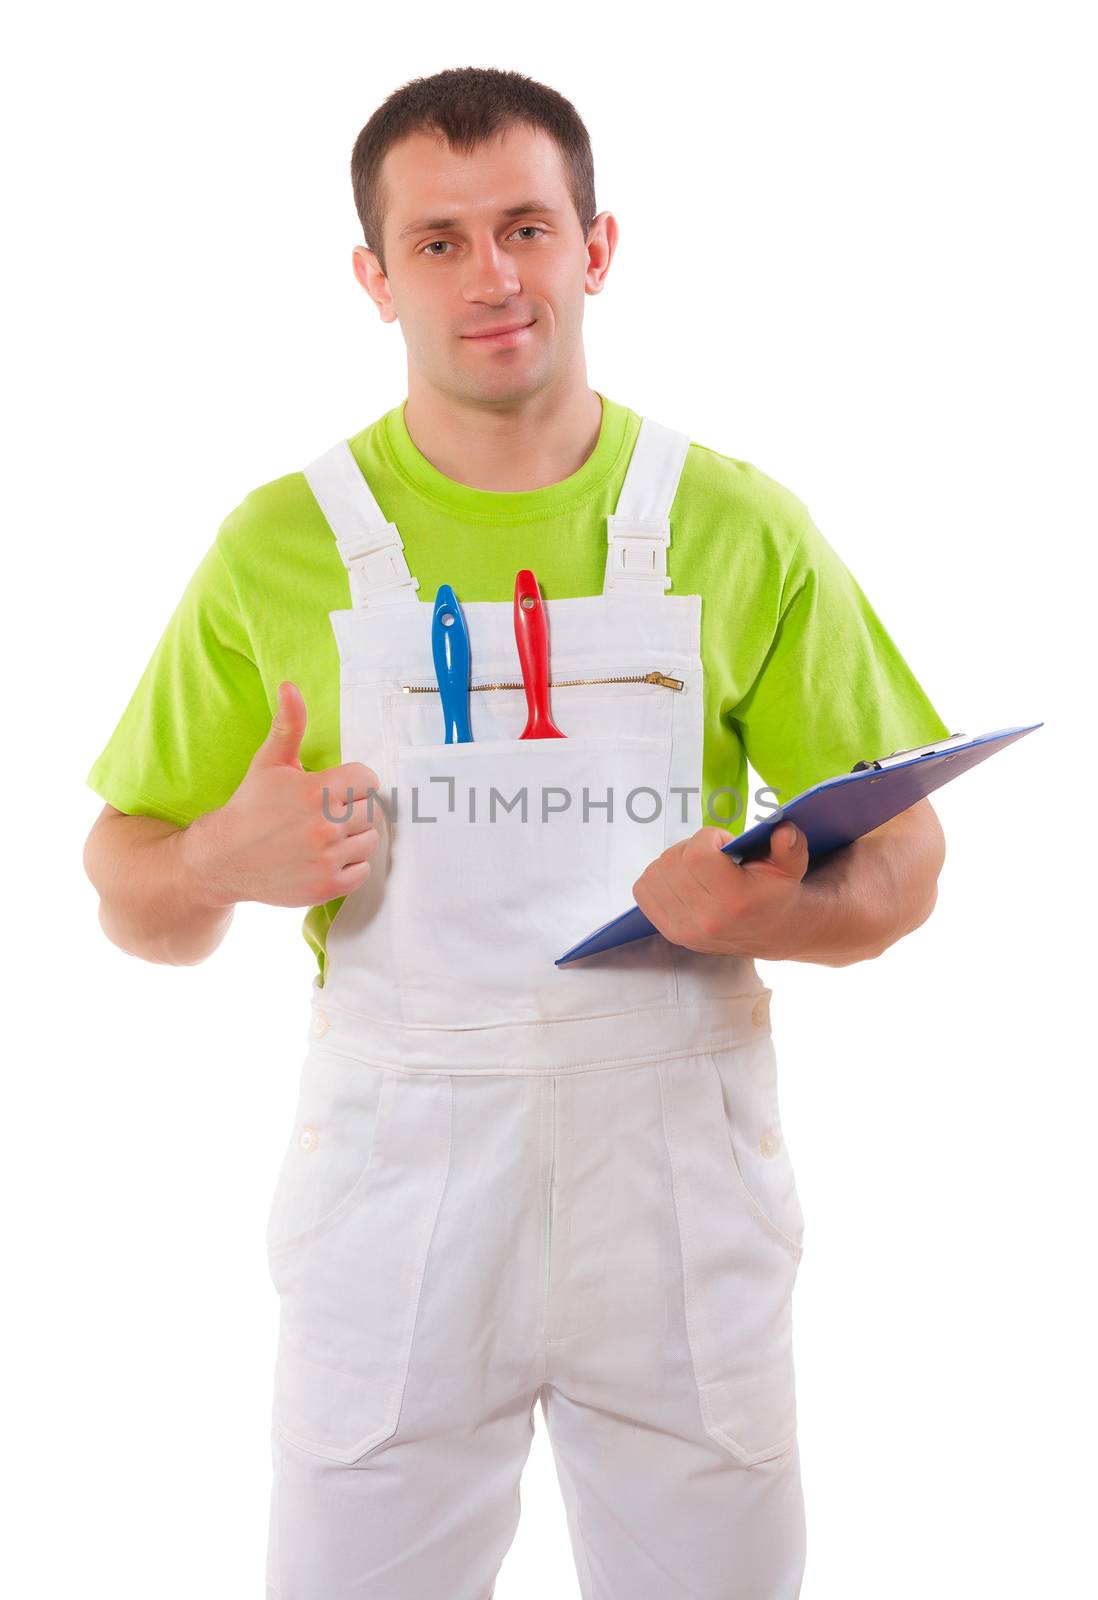 Painter with a clipboard and thumb up